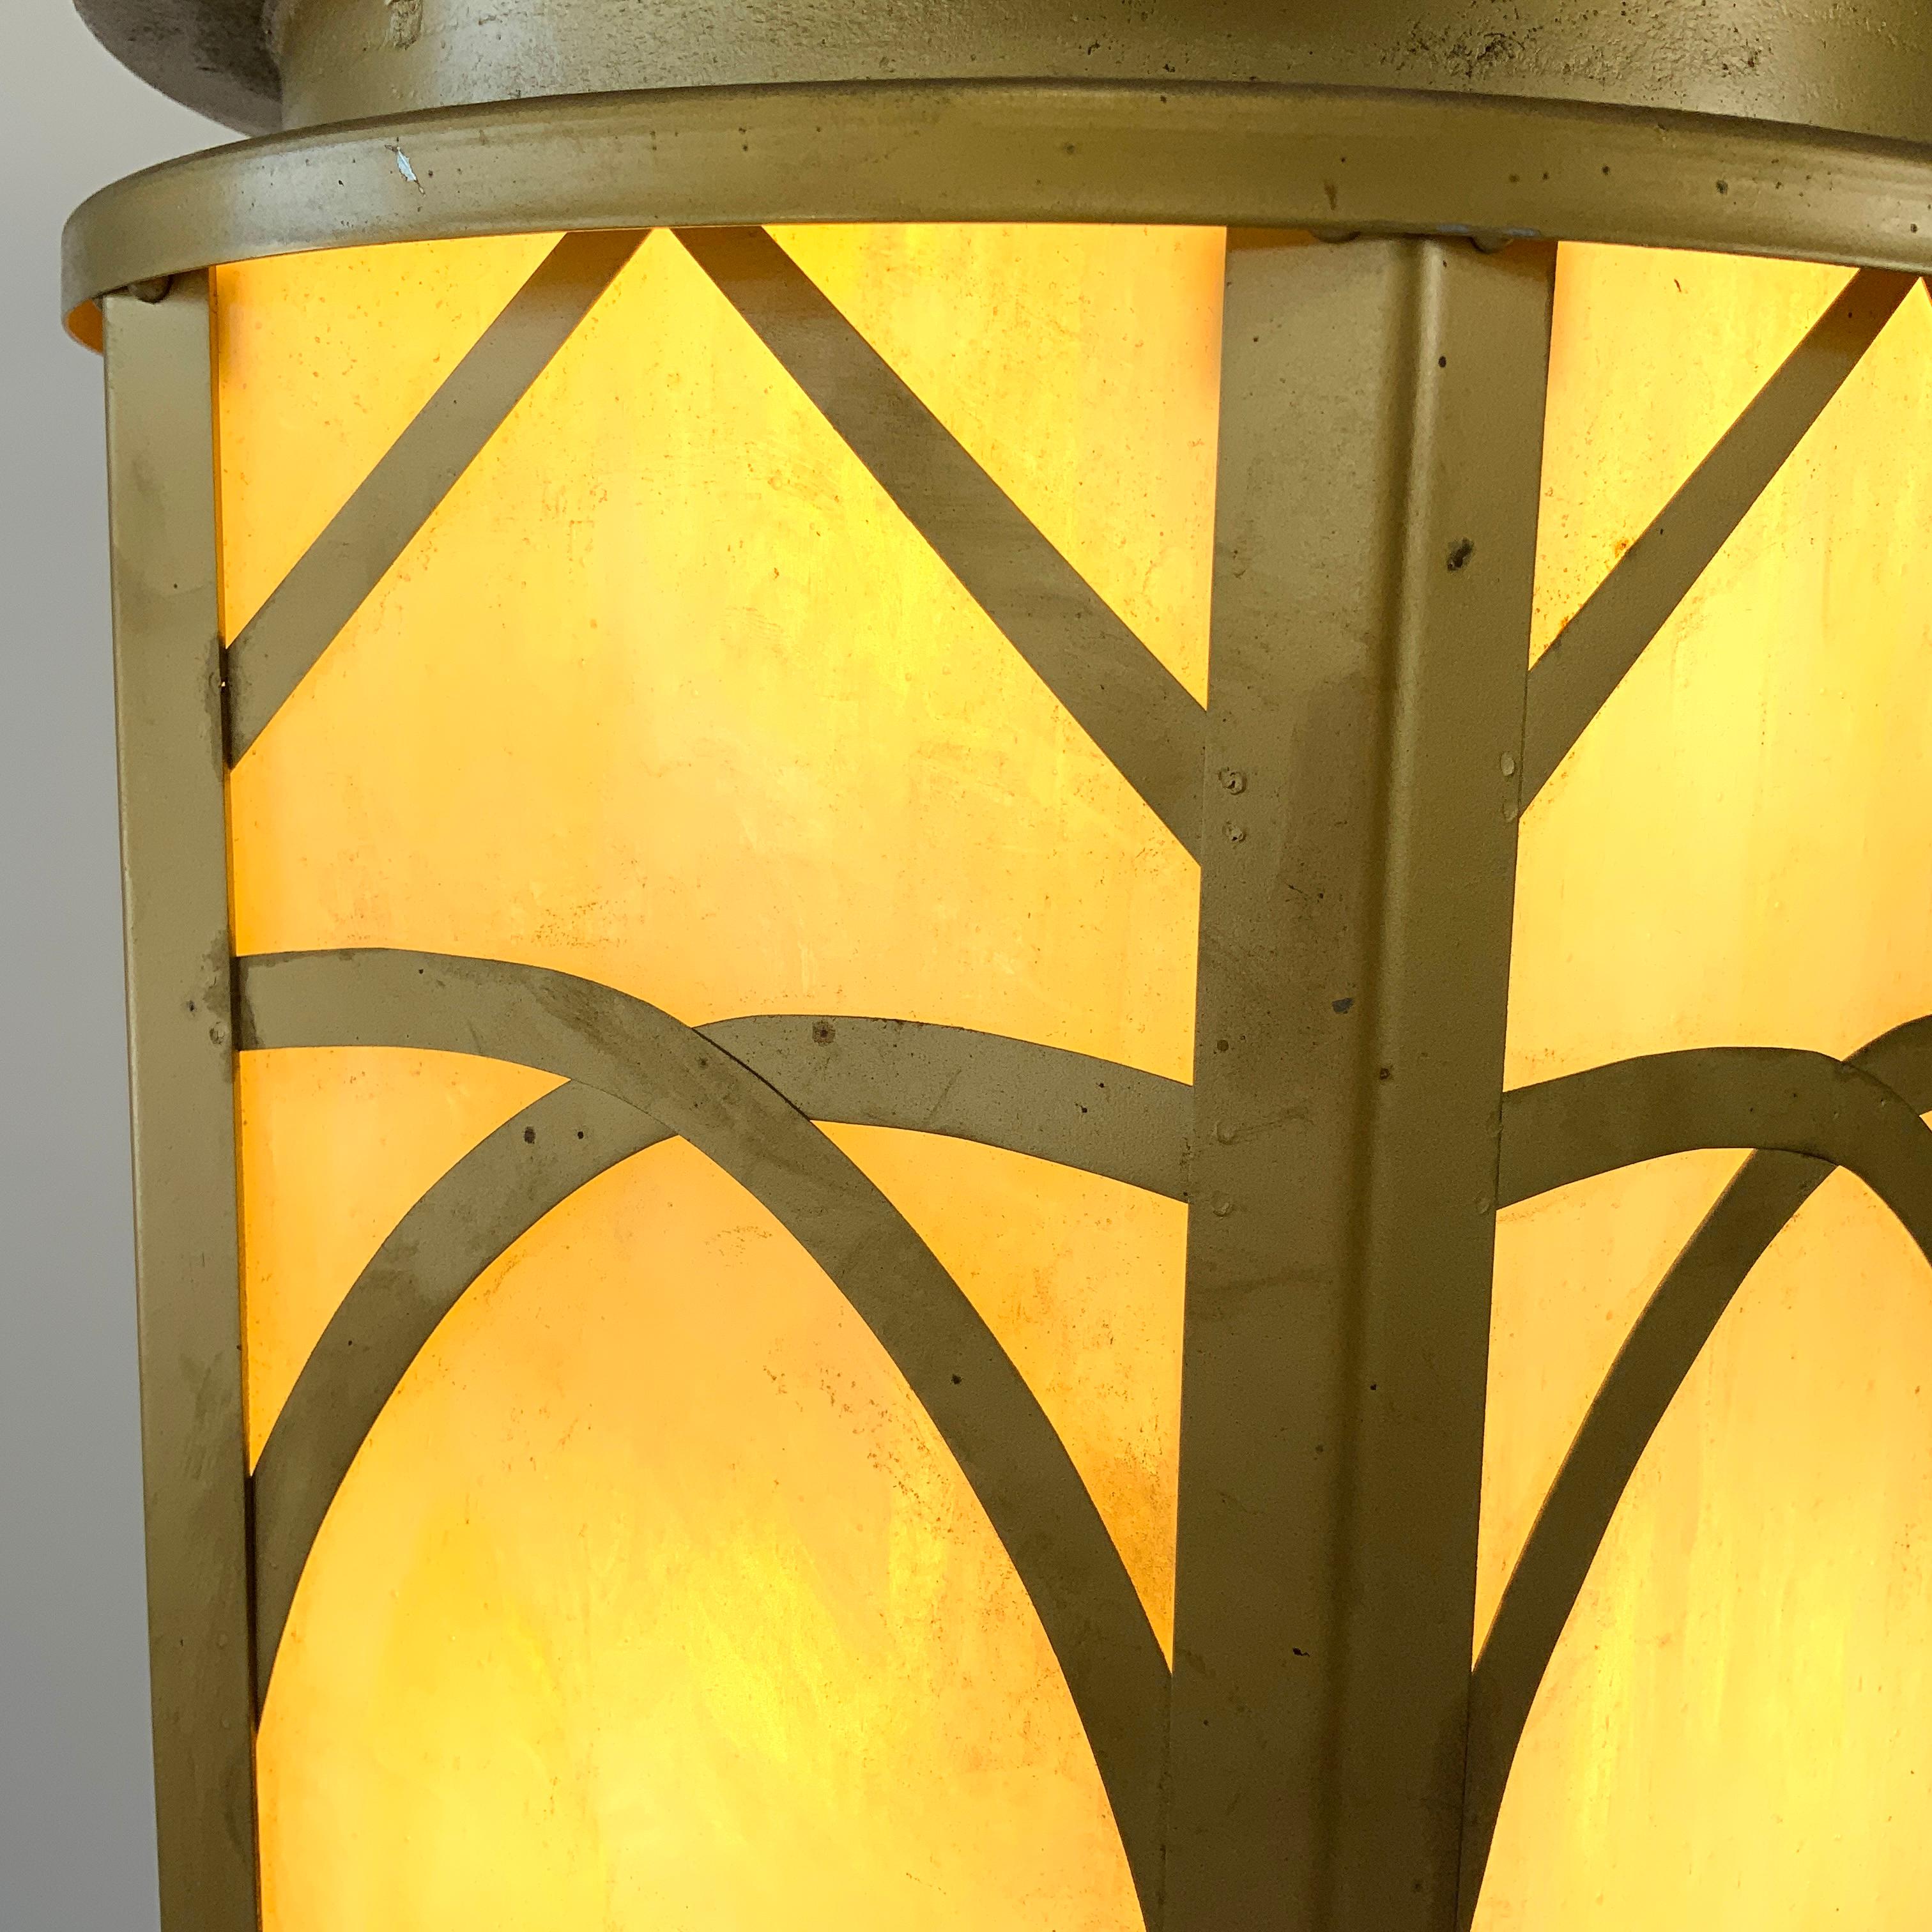 A pair of unusual six-sided (hexagonal) cathedral lantern lamps, the main frame in sheet metal and the crown in 0.25 in. cast iron. The stained glass is a mottled cream-light yellow slag glass. Besides the typical Art Deco interweaving metal design,